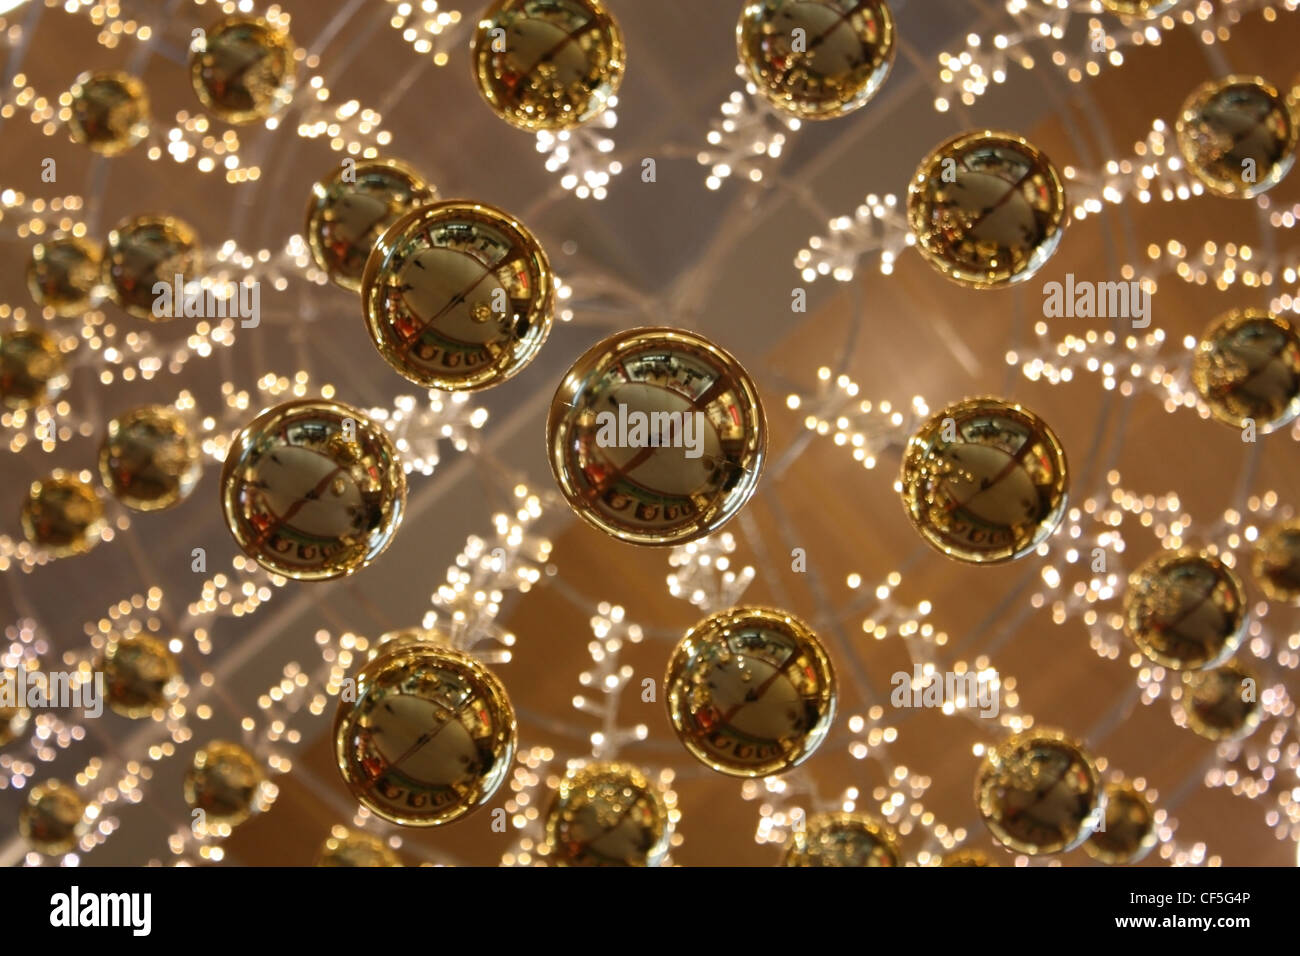 Christmas Ornaments Hanging From A Ceiling Stock Photo